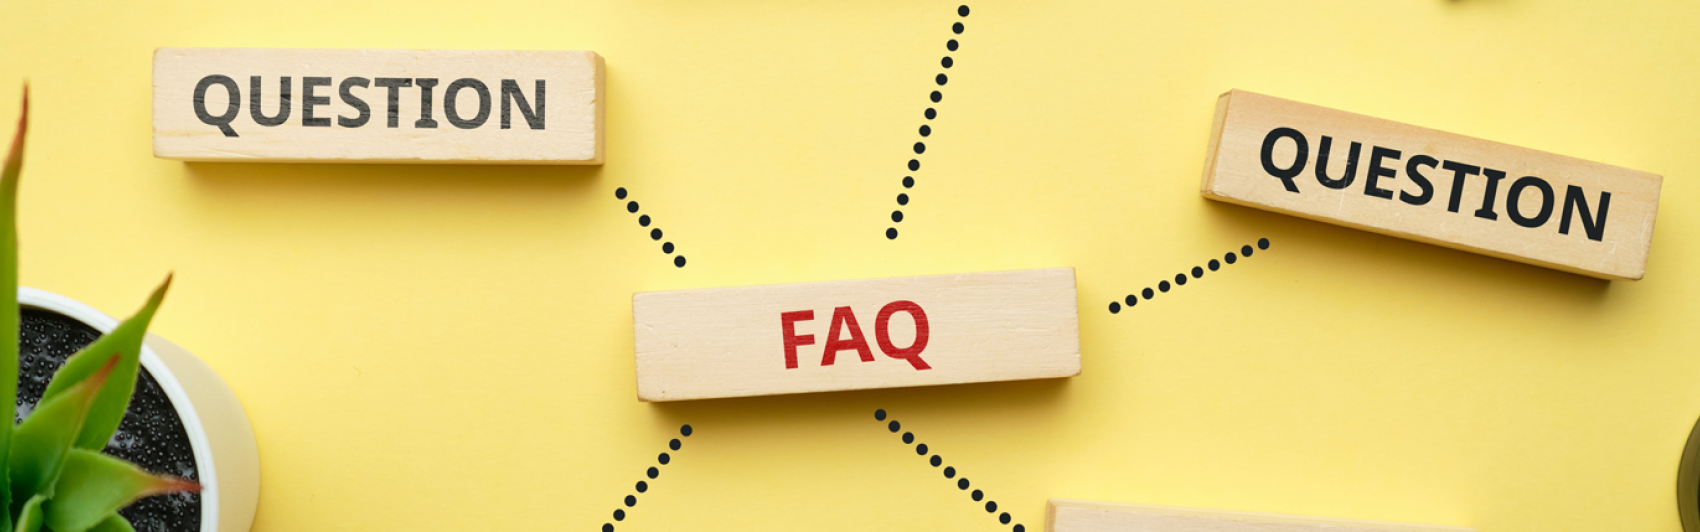 faq; question; answer; ask; text; service; business; frequently; word; information; solution; education; sign; symbol; white; concept; communication; help; internet; idea; problem; confusion; assistance